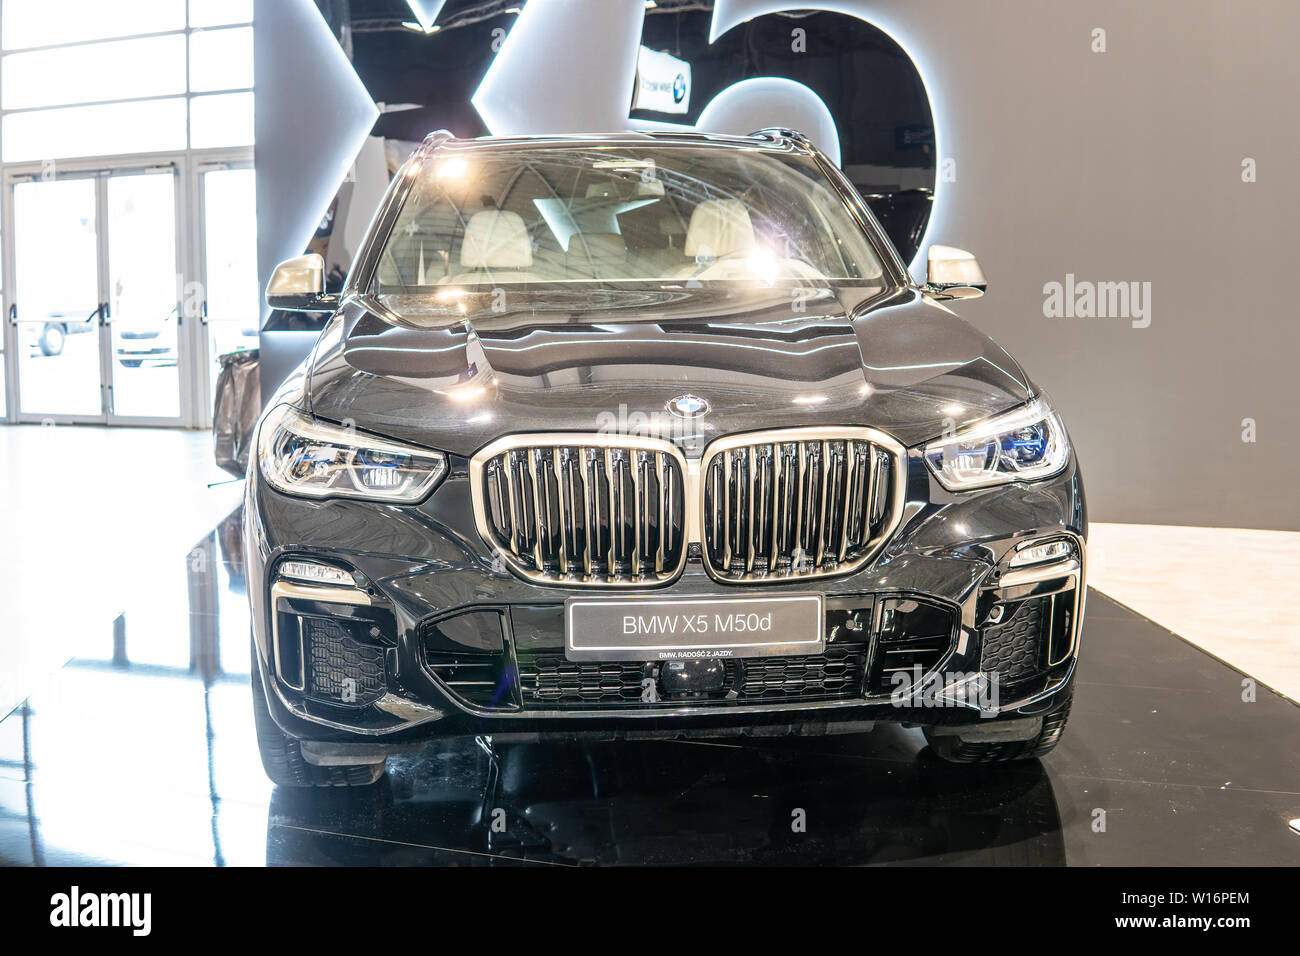 Poznan, Poland, Mar 2019 all new BMW X5 M50d,Poznan International Motor Show, 4th gen G05, suv manufactured and marketed by BMW Stock Photo